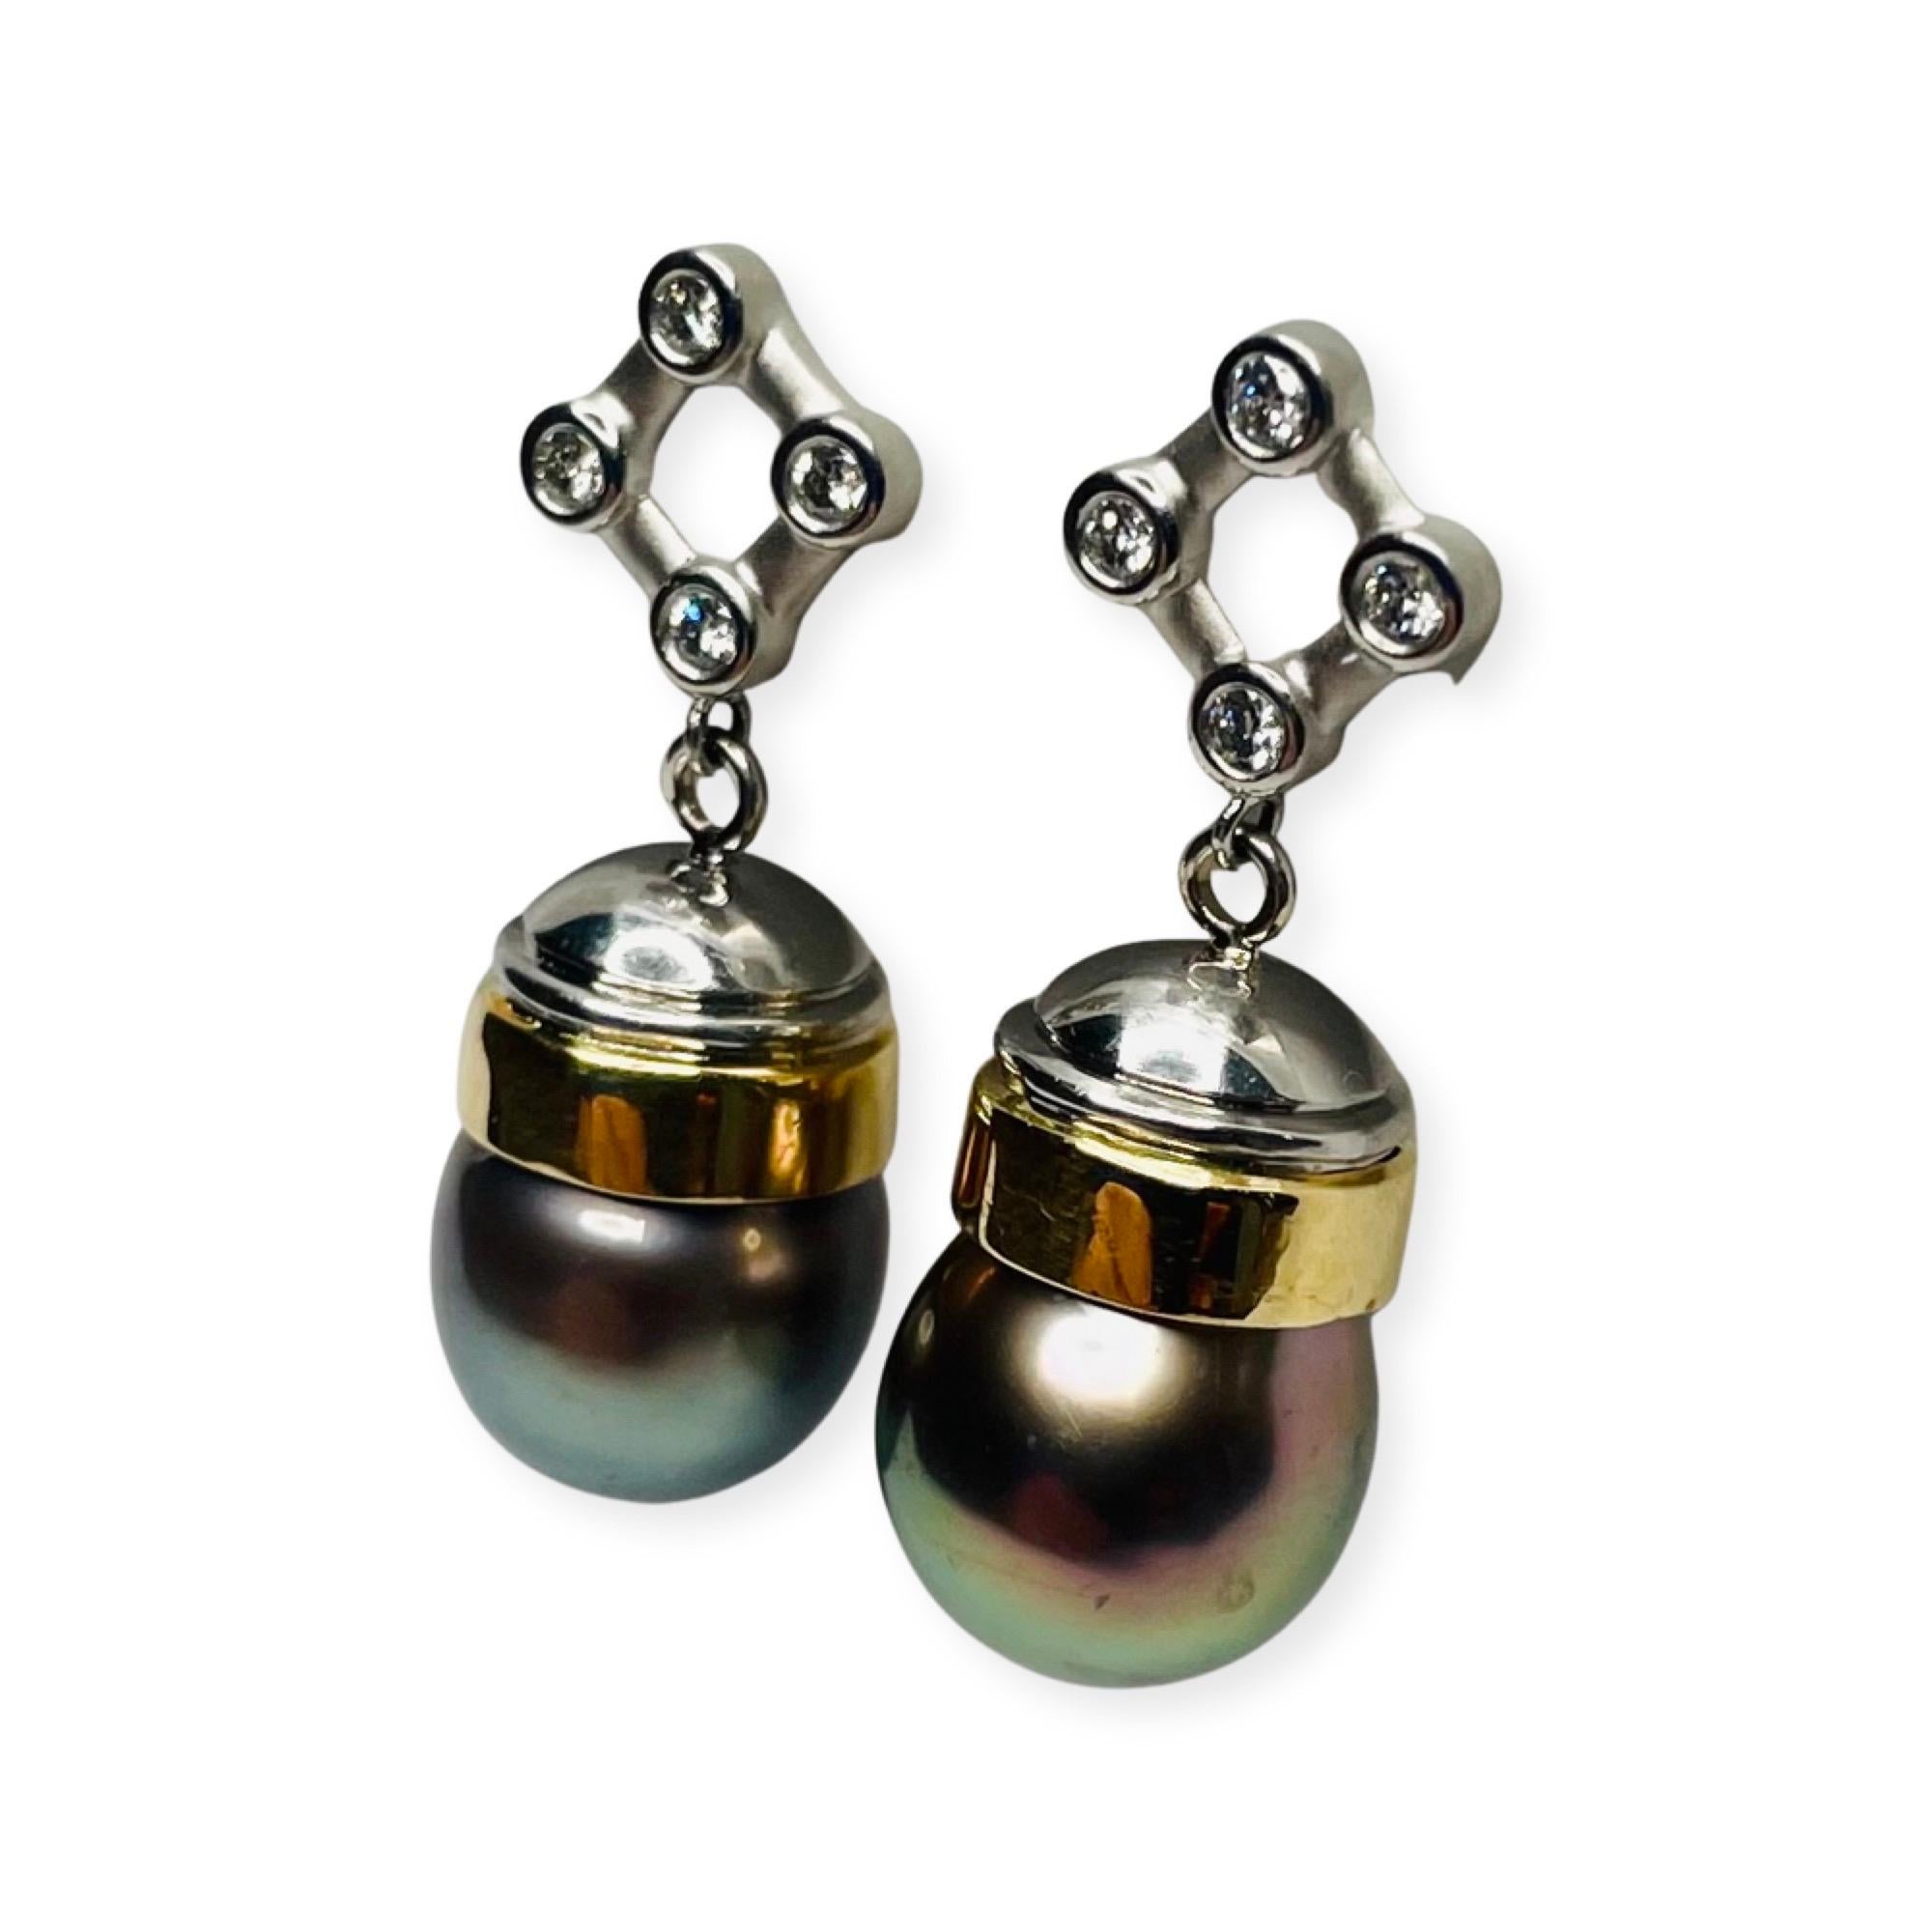 Lithos/Rudolf Erdel 18K Yellow Gold & Platinum Diamond Natural Color Black Tahitian Pearl Earrings. The pearls are 11.5 mm. The natural color black South Sea Tahitian pearls have a copper and rose overtone. They have slight blemishes, are cultured